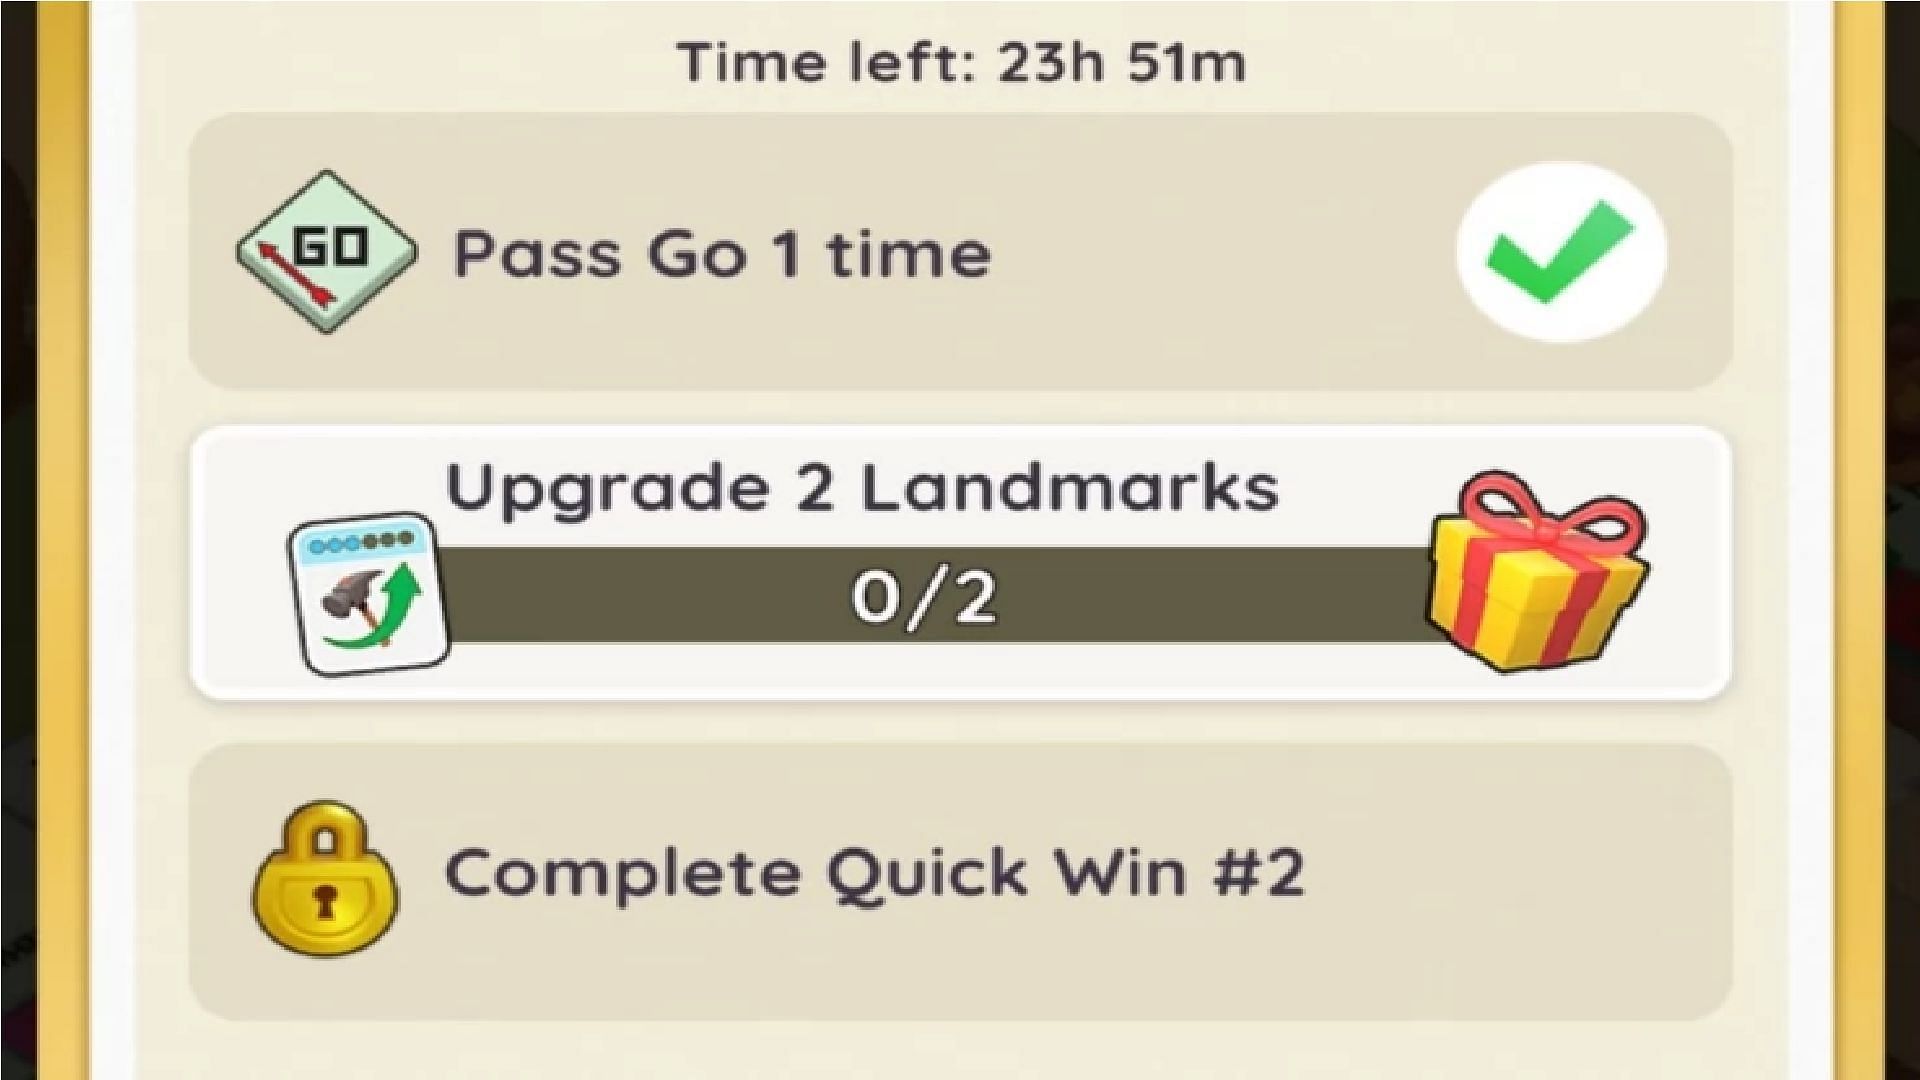 Complete the quick wins to earn more gifts. (Image via Scopely)